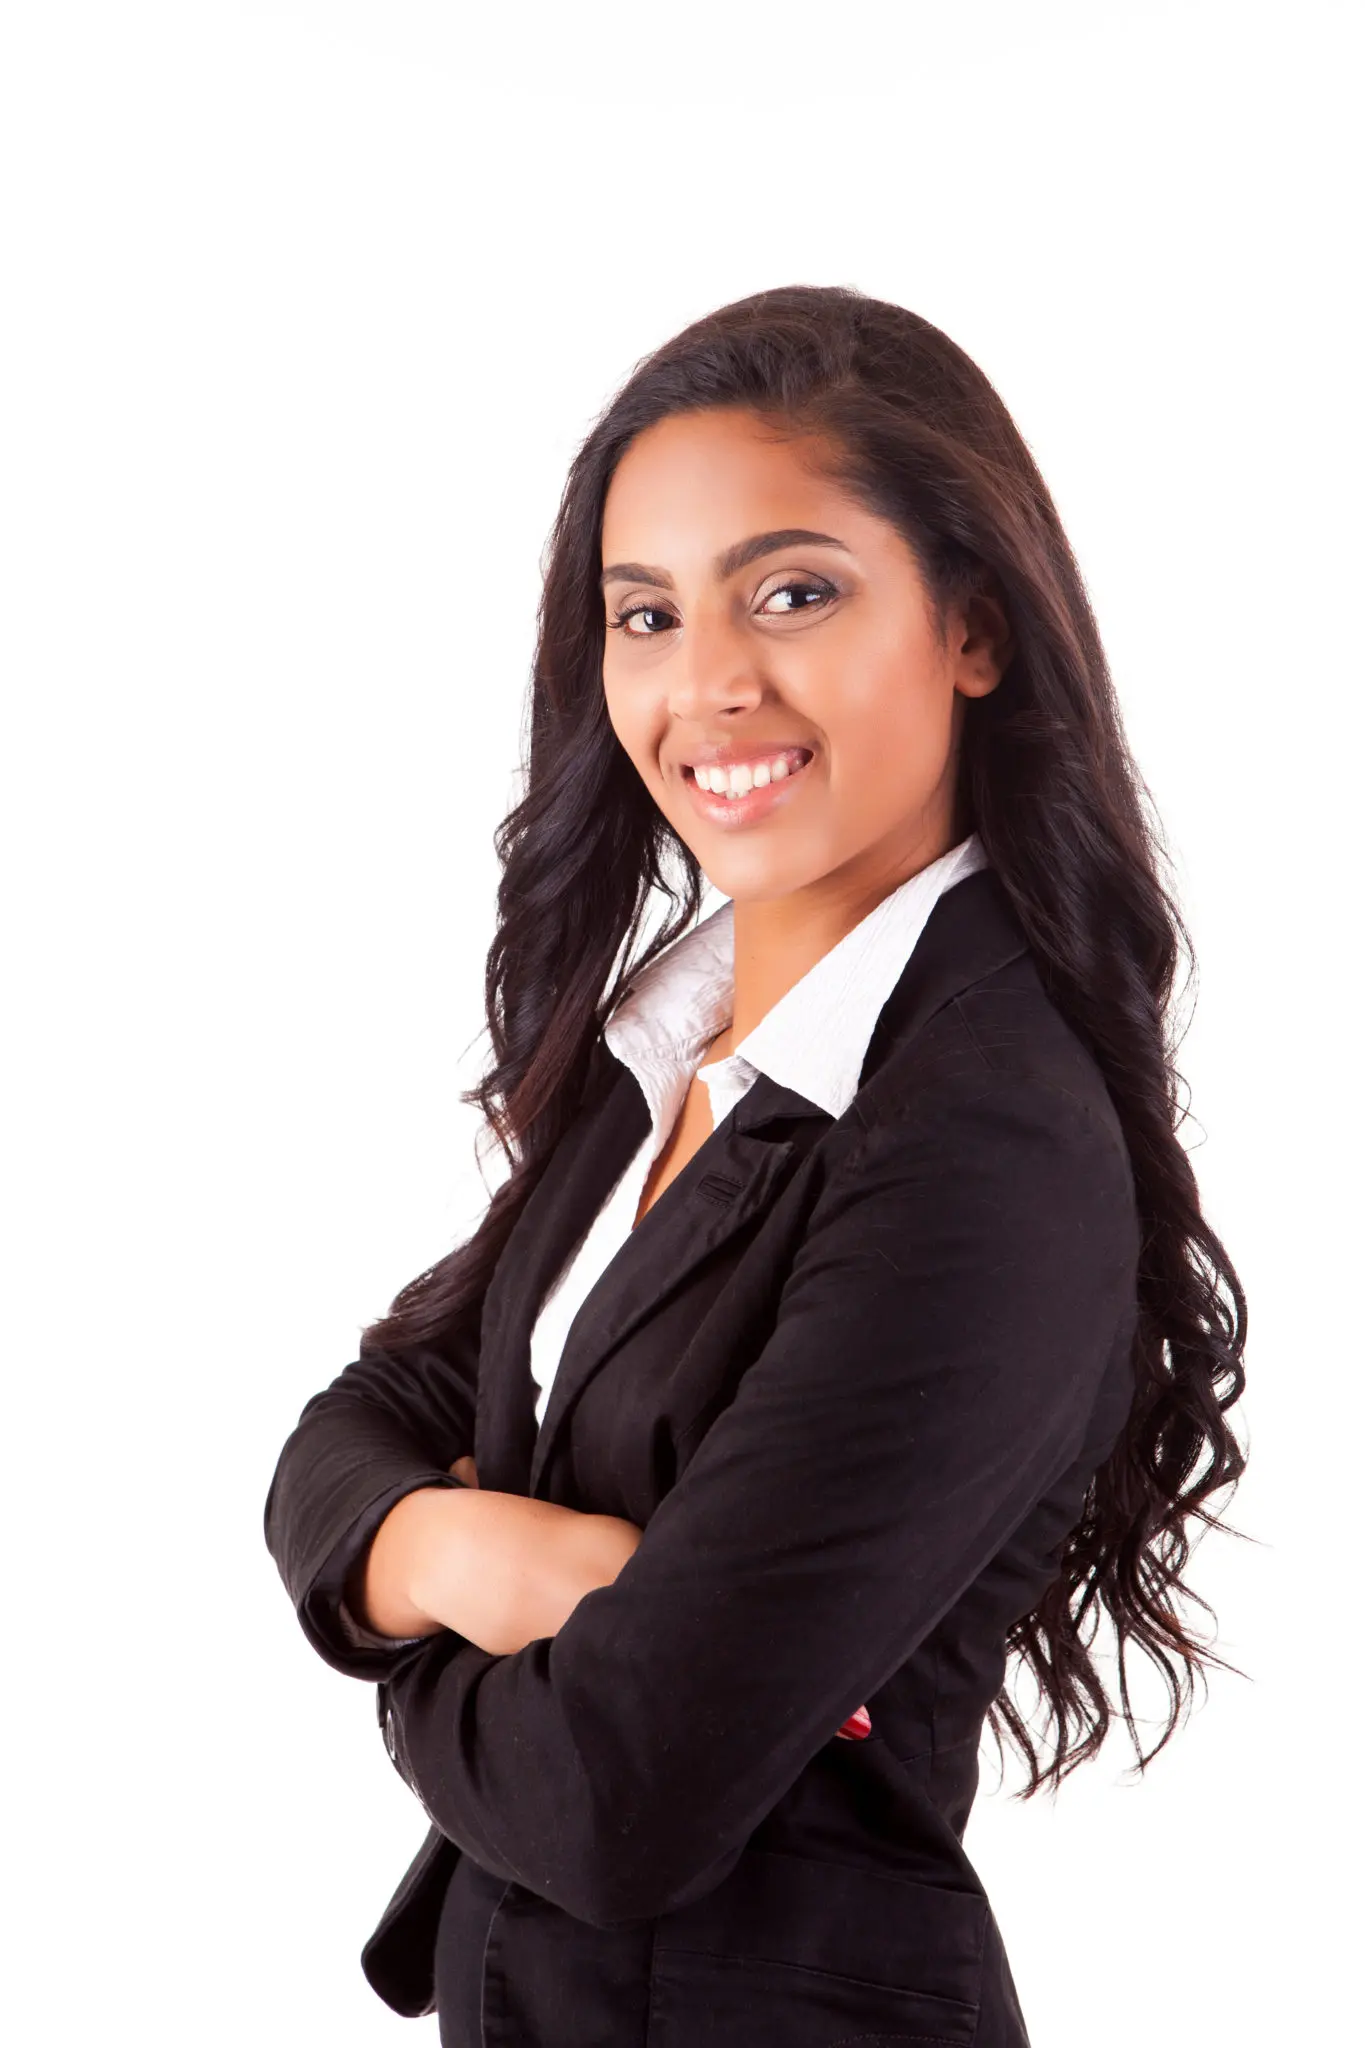 Portrait of modern business woman smiling over white background